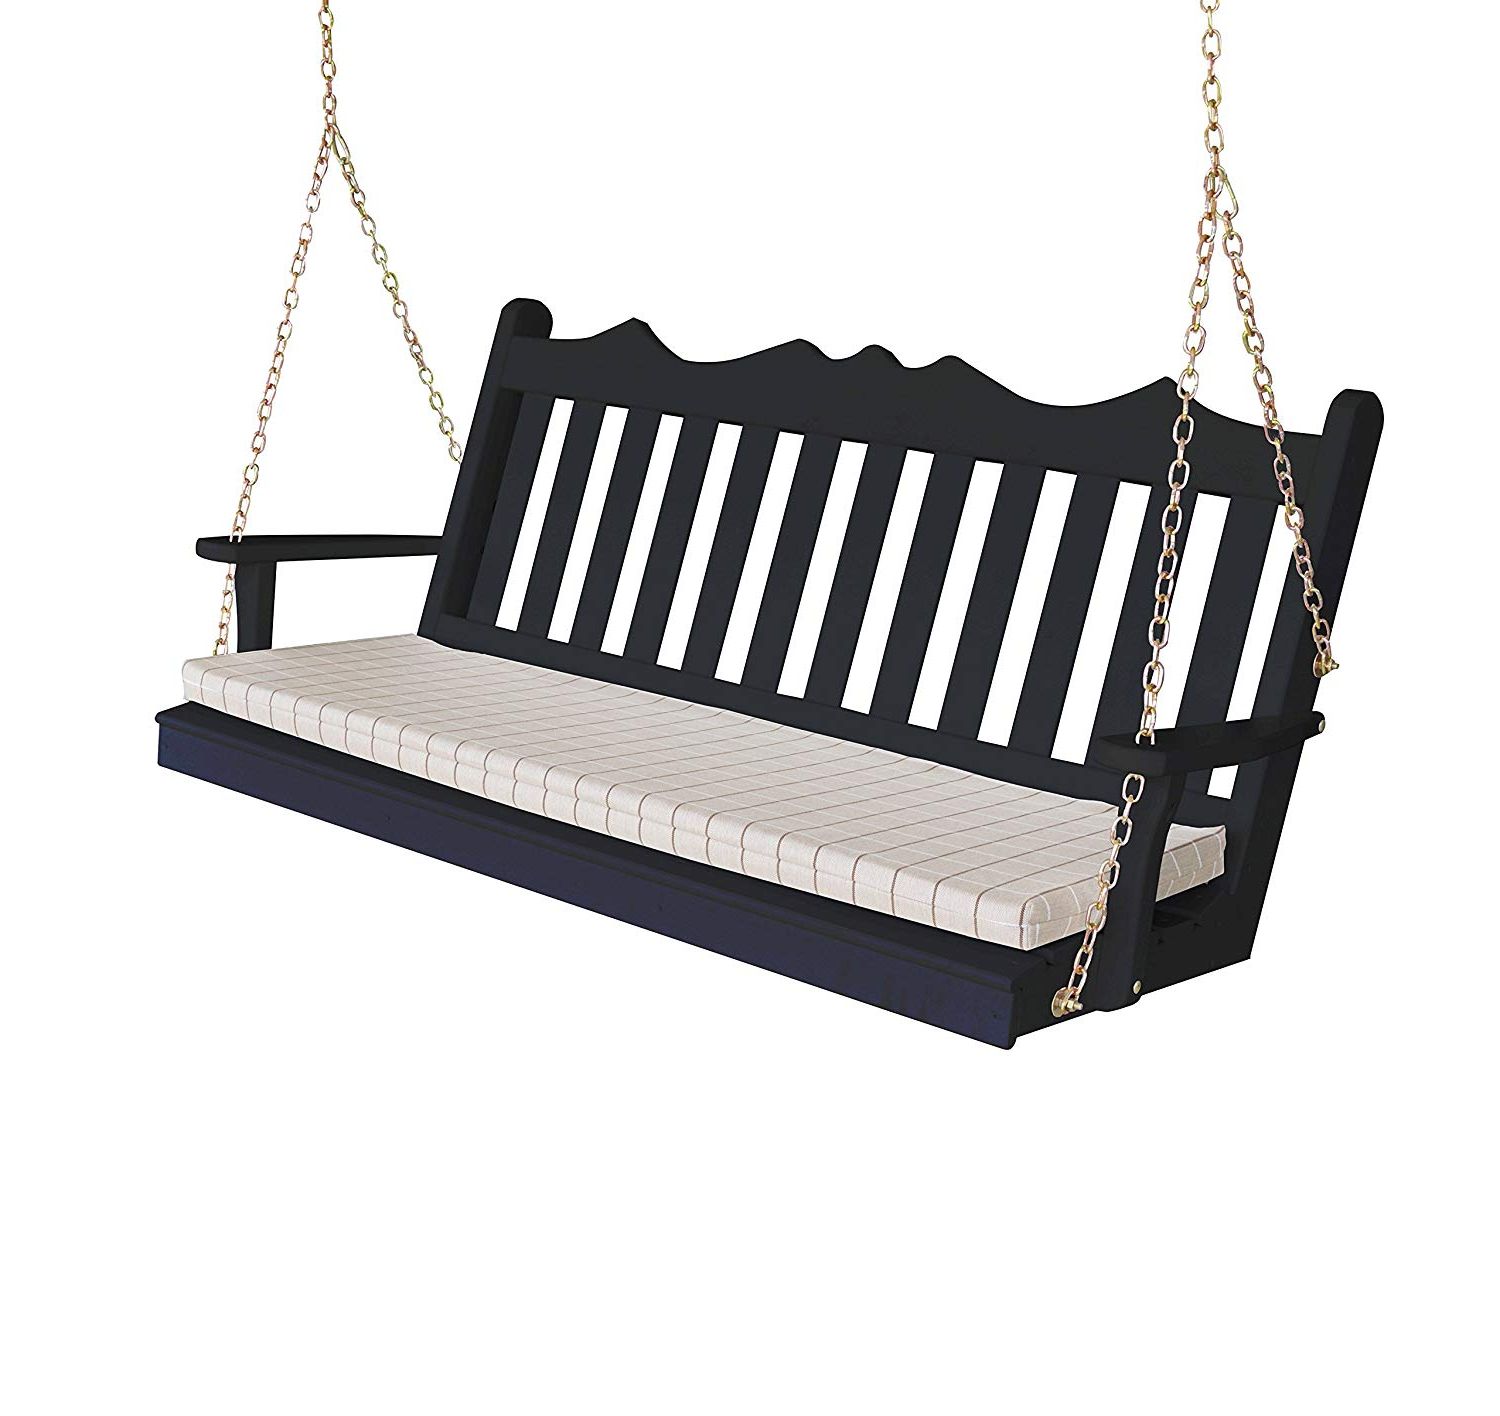 Amazon : Wood Porch Swing, Amish Outdoor Hanging Porch Within Well Known Patio Hanging Porch Swings (View 1 of 30)